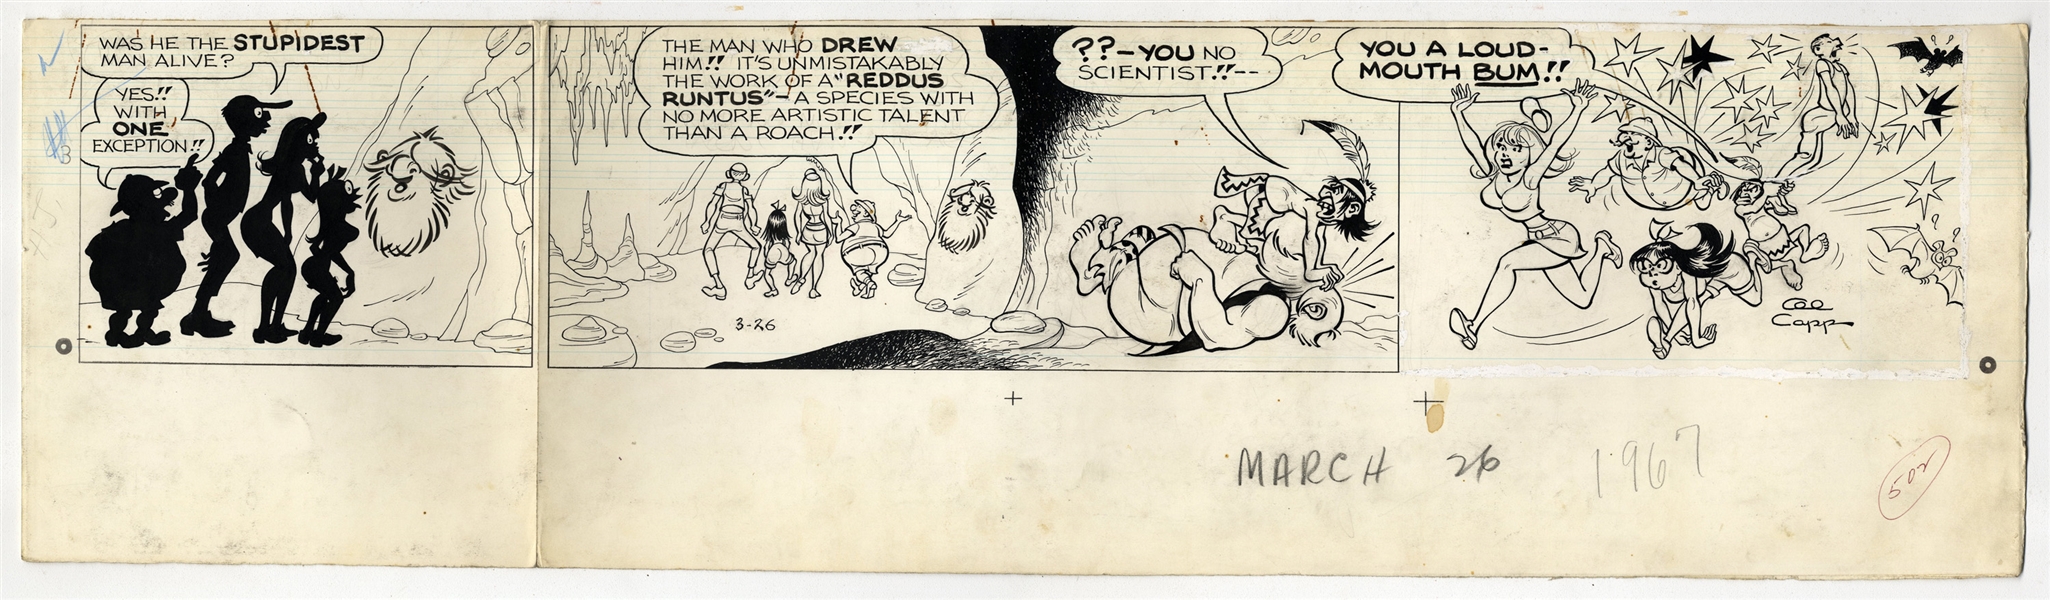 ''Li'l Abner'' Sunday Strip Hand-Drawn & Signed by Al Capp From 26 March 1967 -- Hairless Joe & Lonesome Polecat -- in Two Segments, Larger 29'' x 8'' -- Very Good -- From the Al Capp Estate